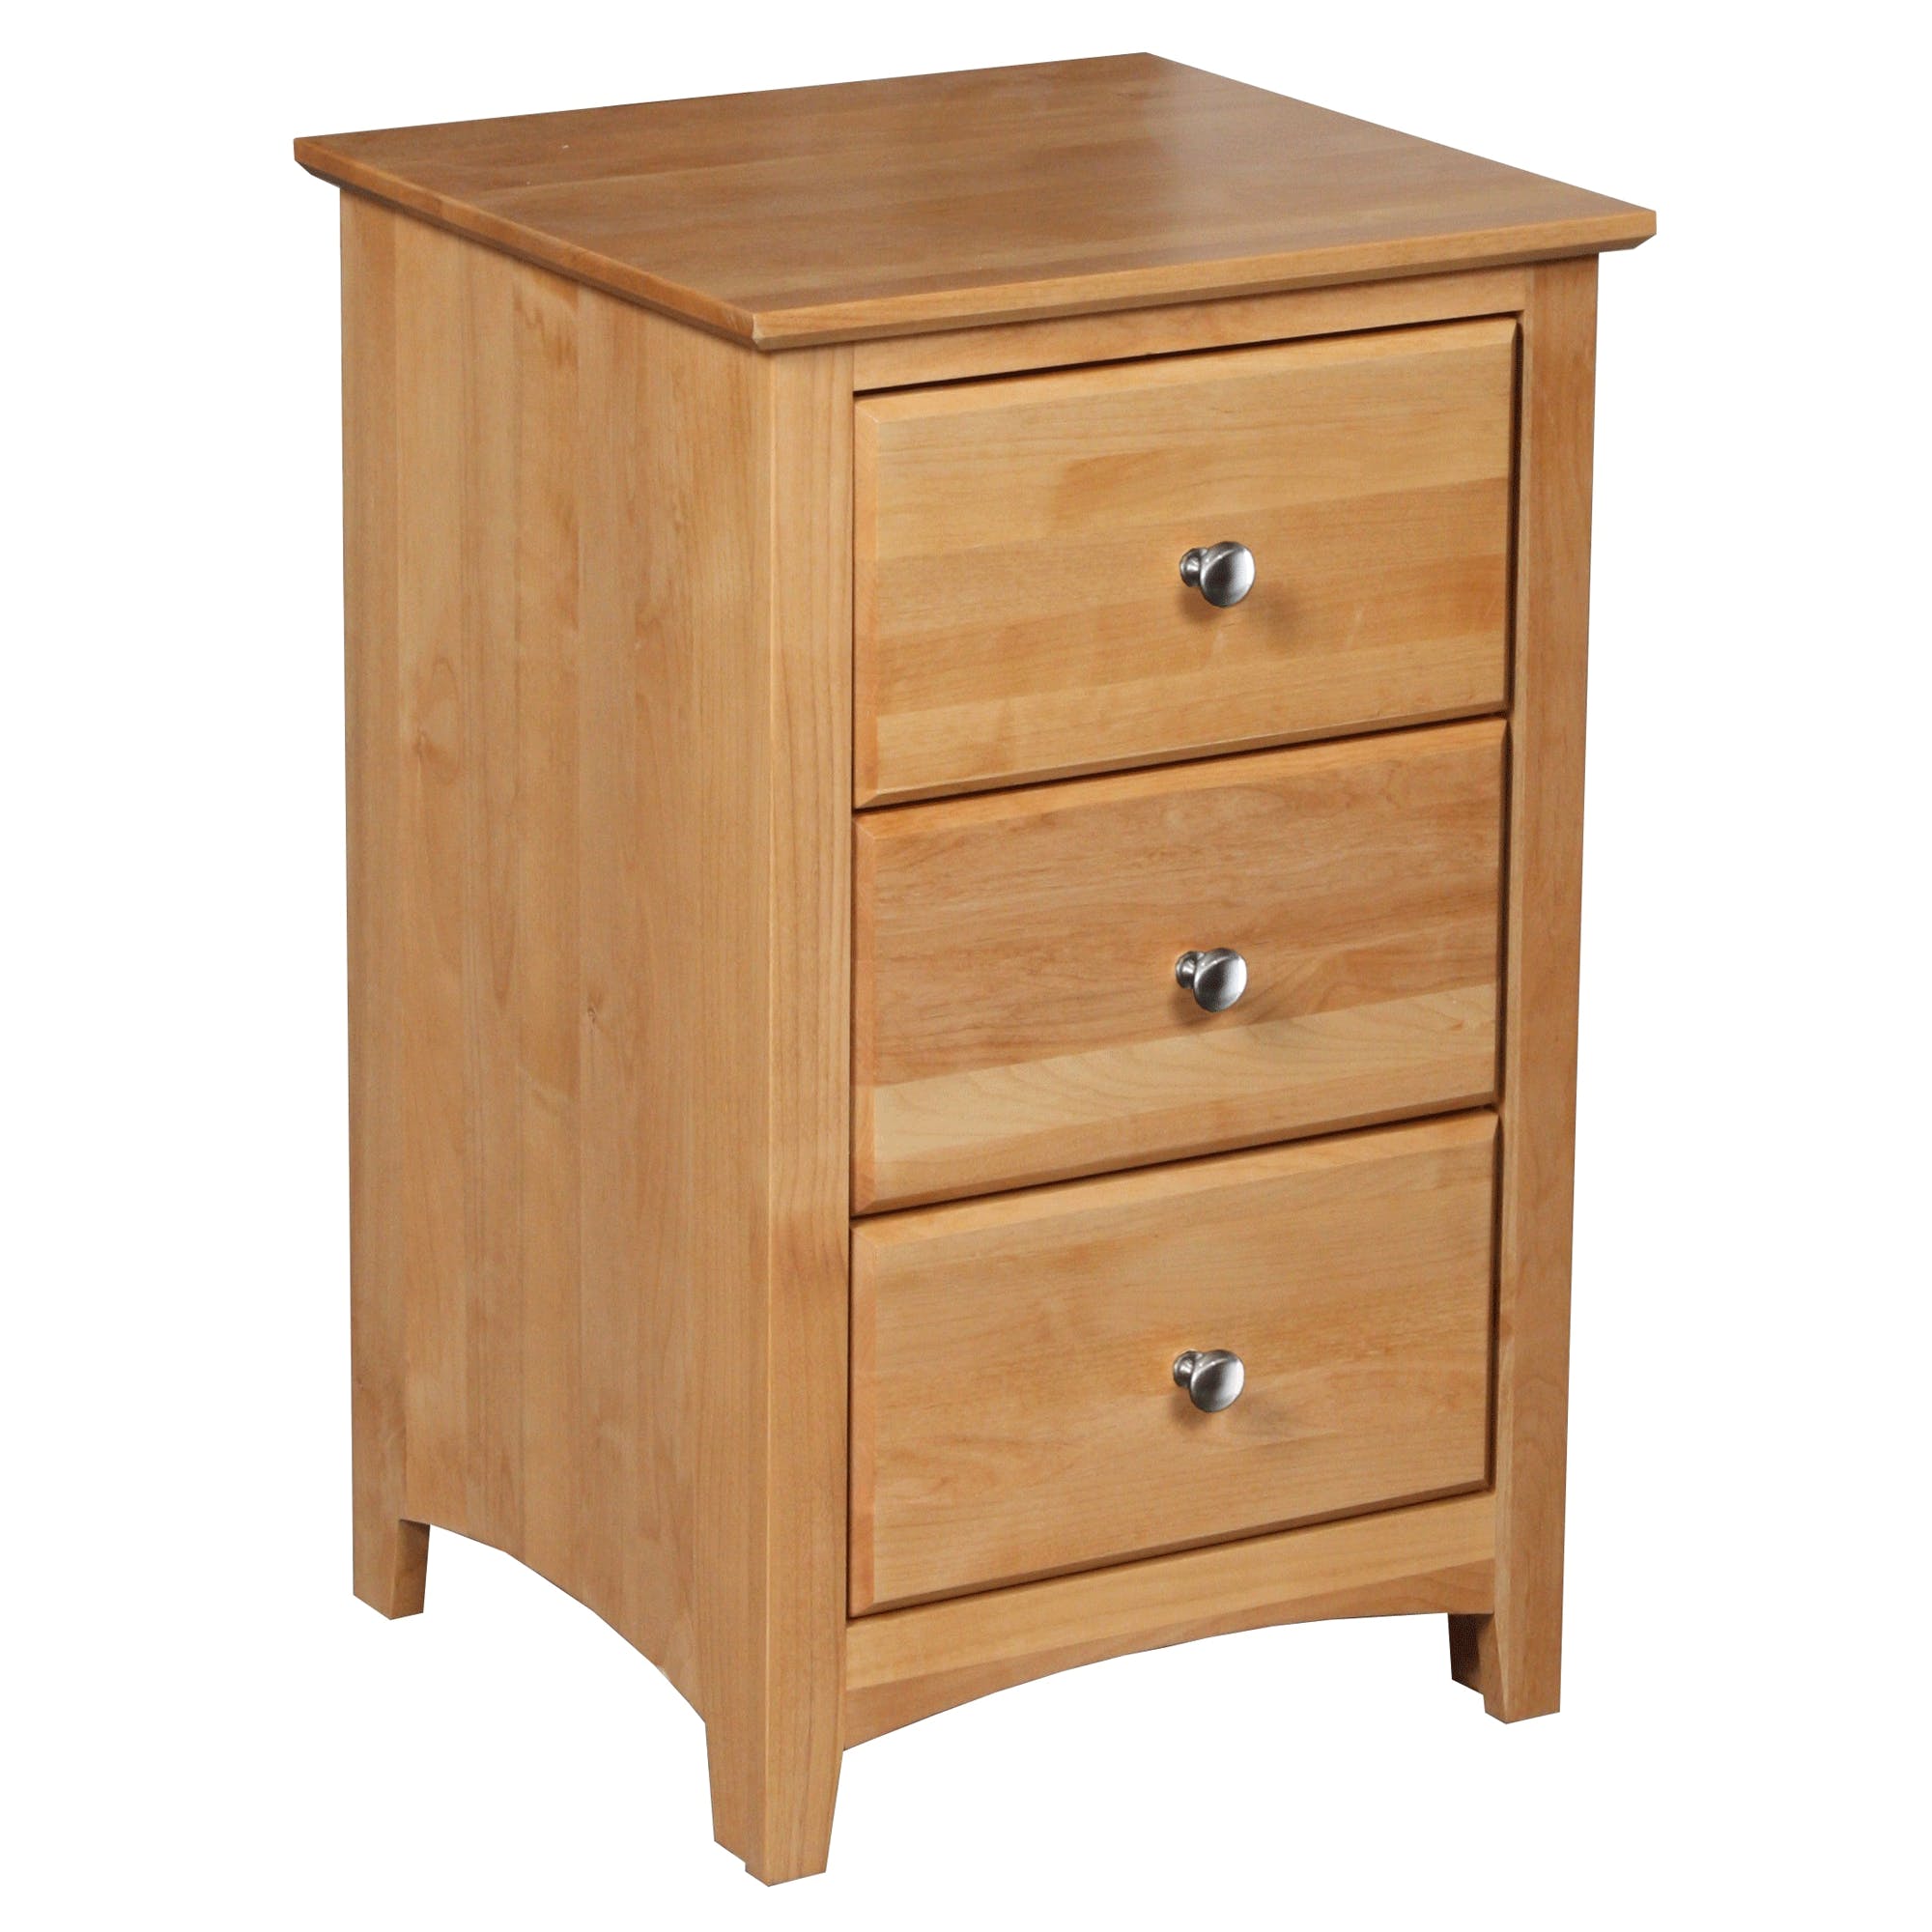 fascinating drawer dresser nightstand target hemnes wooden and whitmor dark chest darley wood delta tiled assembly kalani win material plastic natural solid metal white malm gloss